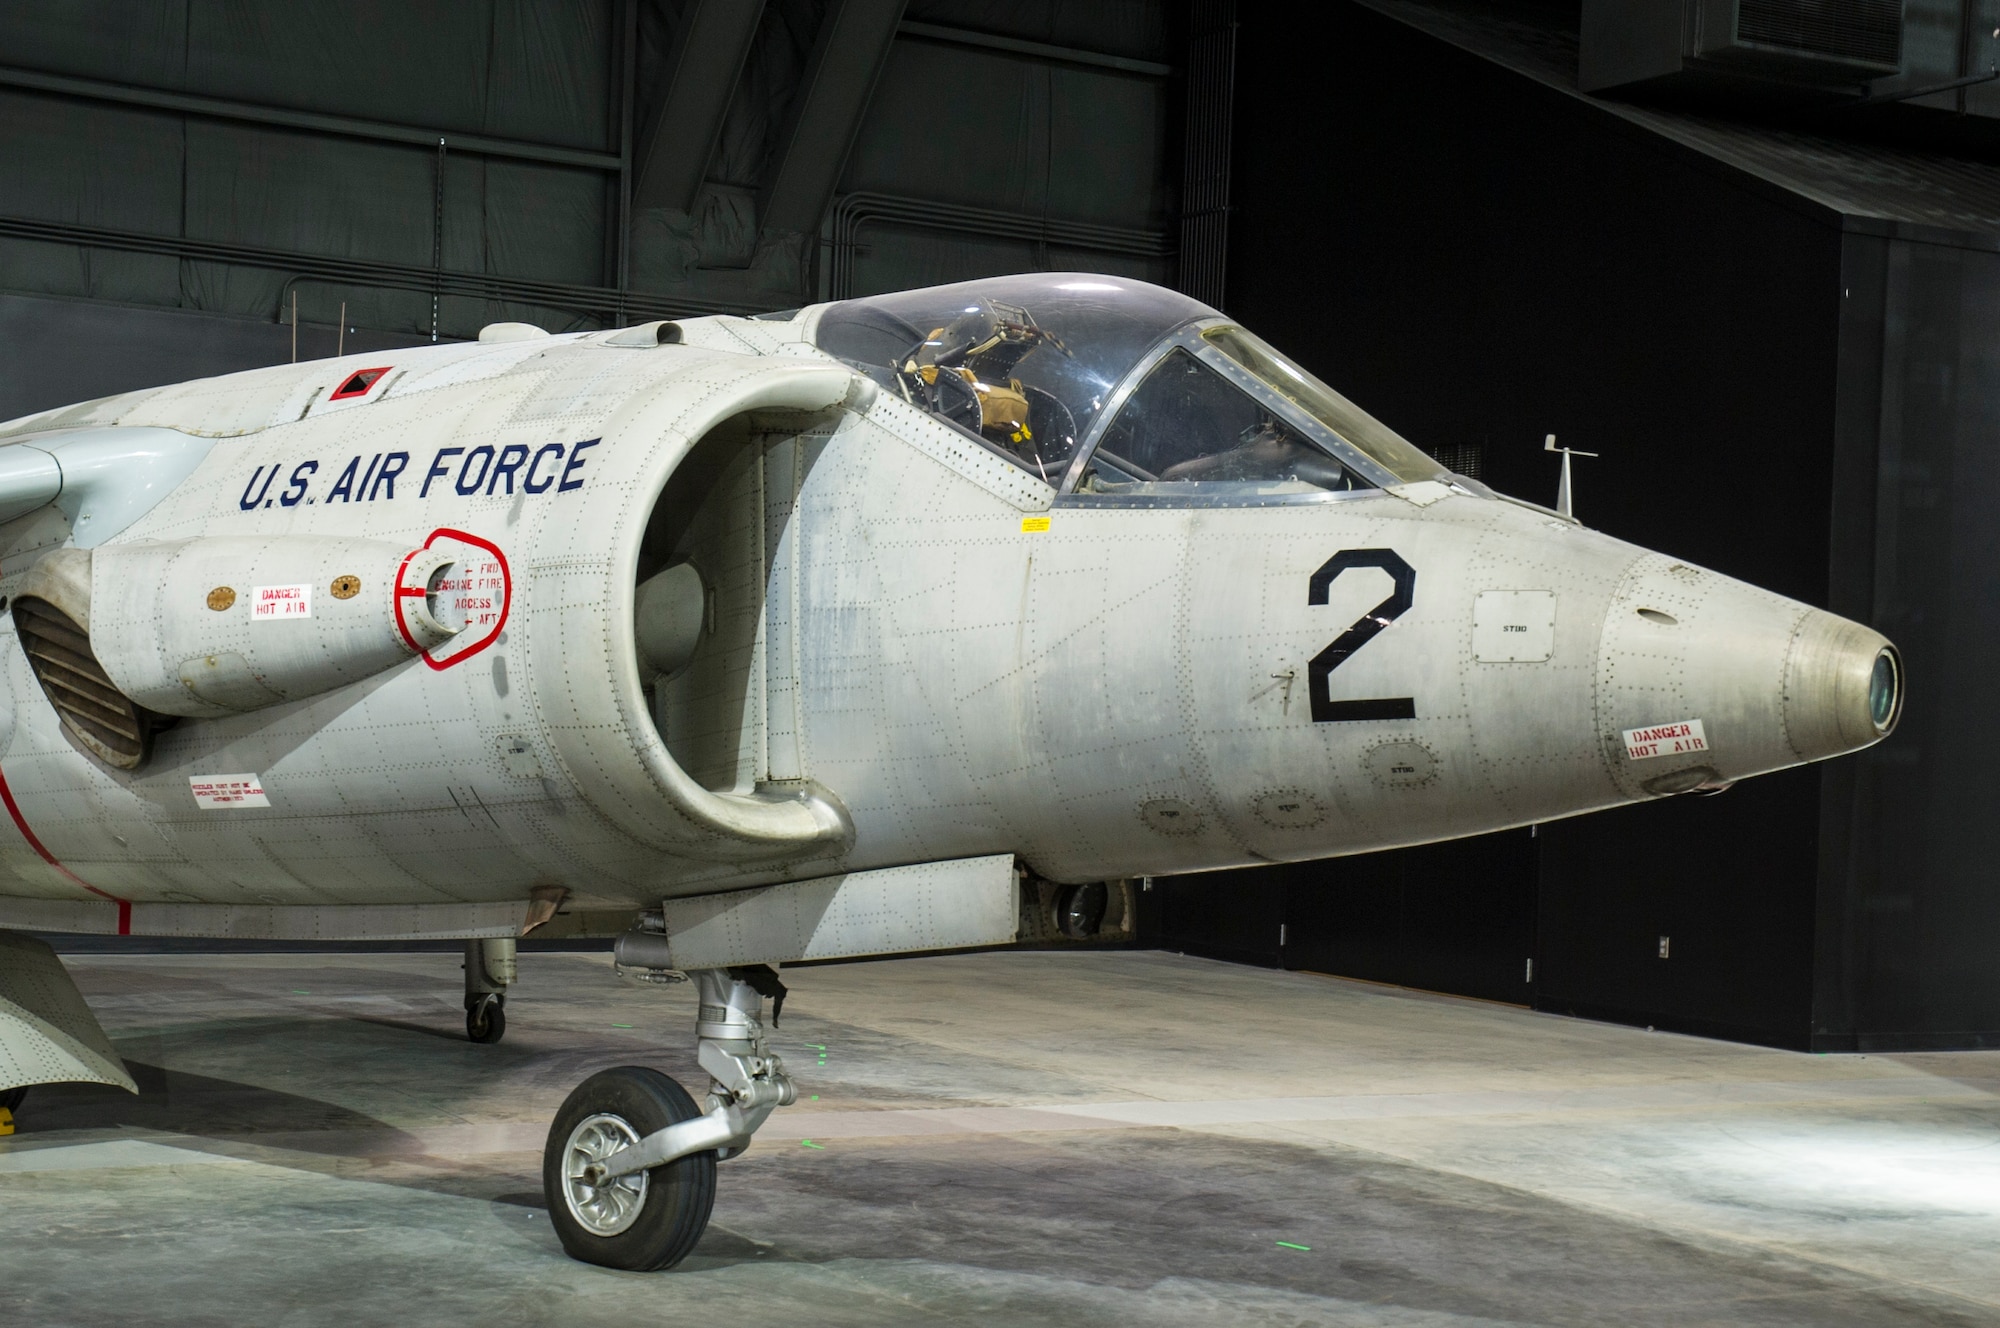 DAYTON, Ohio -- Hawker Siddeley XV-6A Kestrel in the Research & Development Gallery at the National Museum of the U.S. Air Force. (U.S. Air Force photo by Ken LaRock)